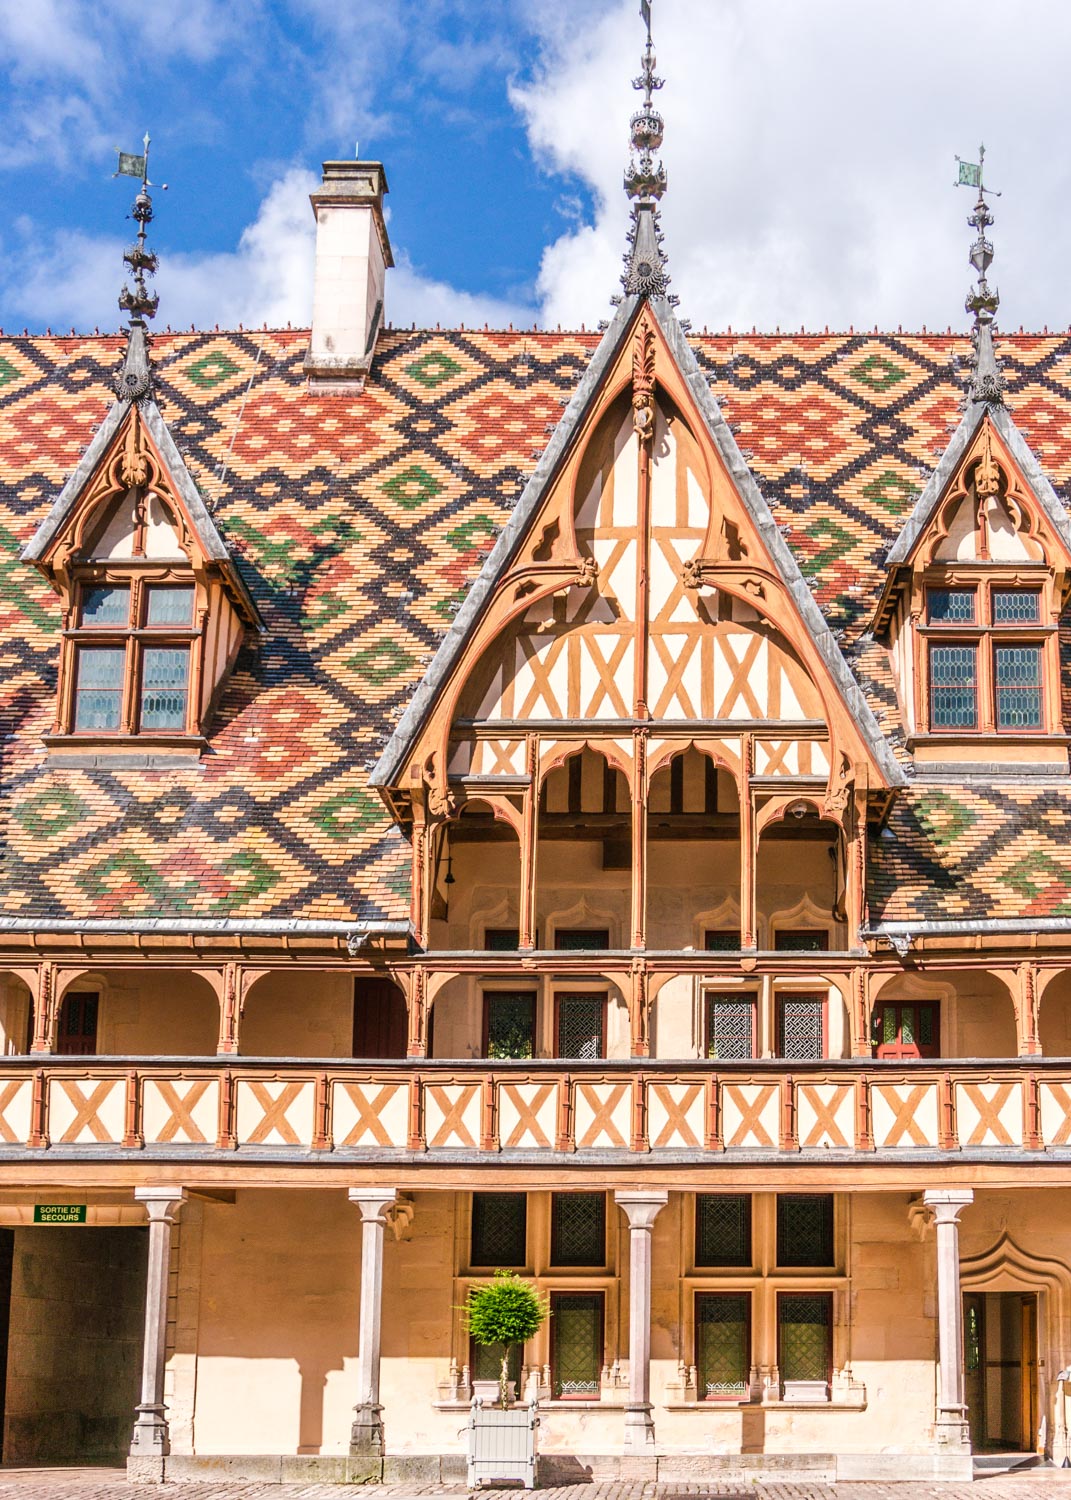 A month in France – Beaune